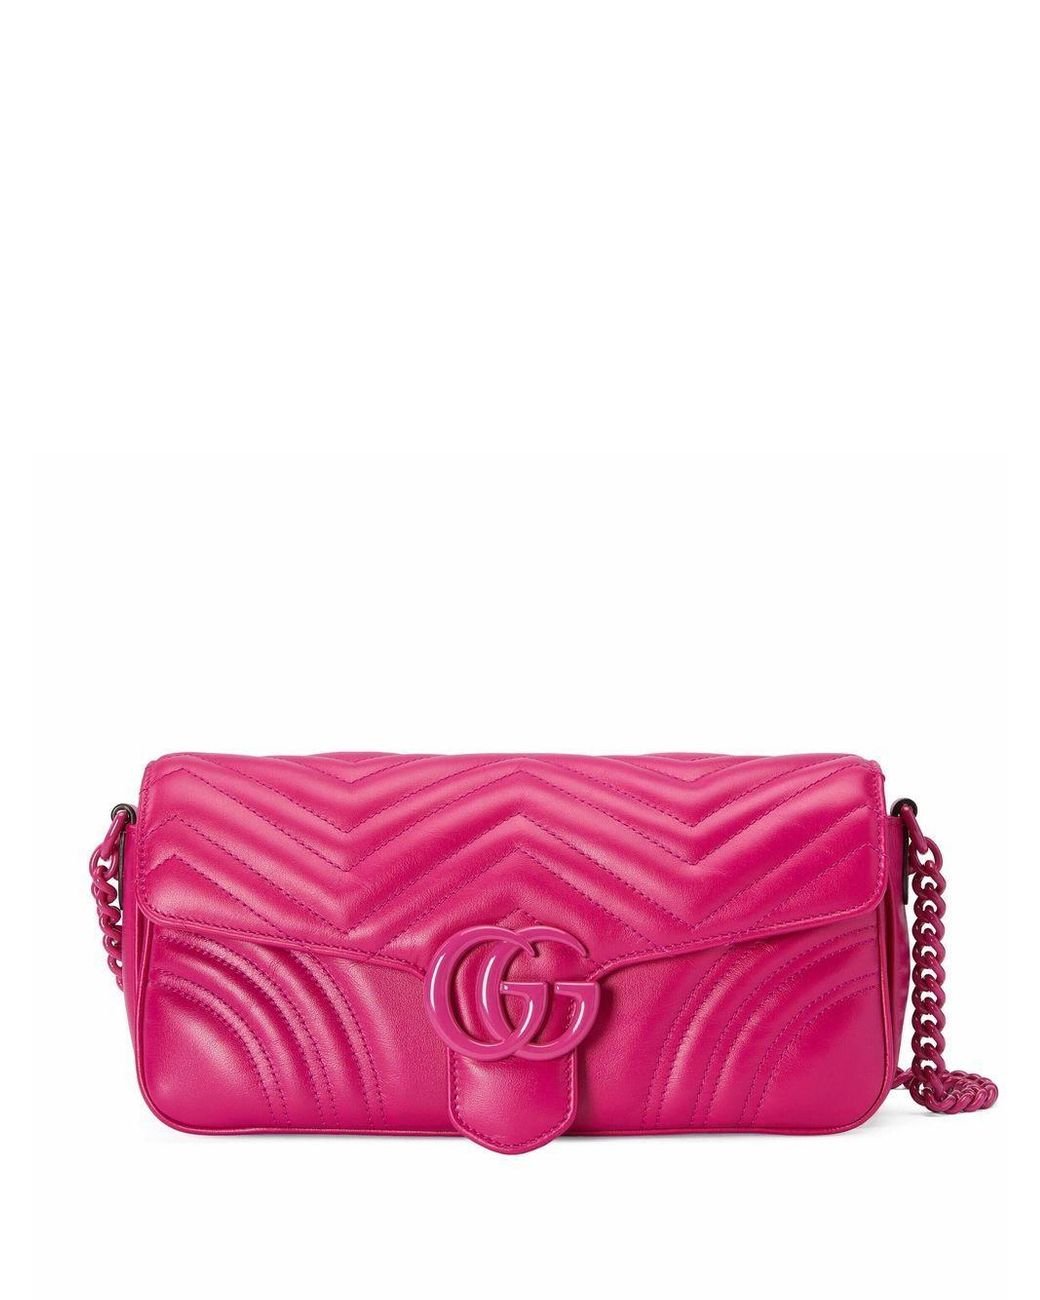 Gucci gg Marmont Shoulder Bag in Pink | Lyst